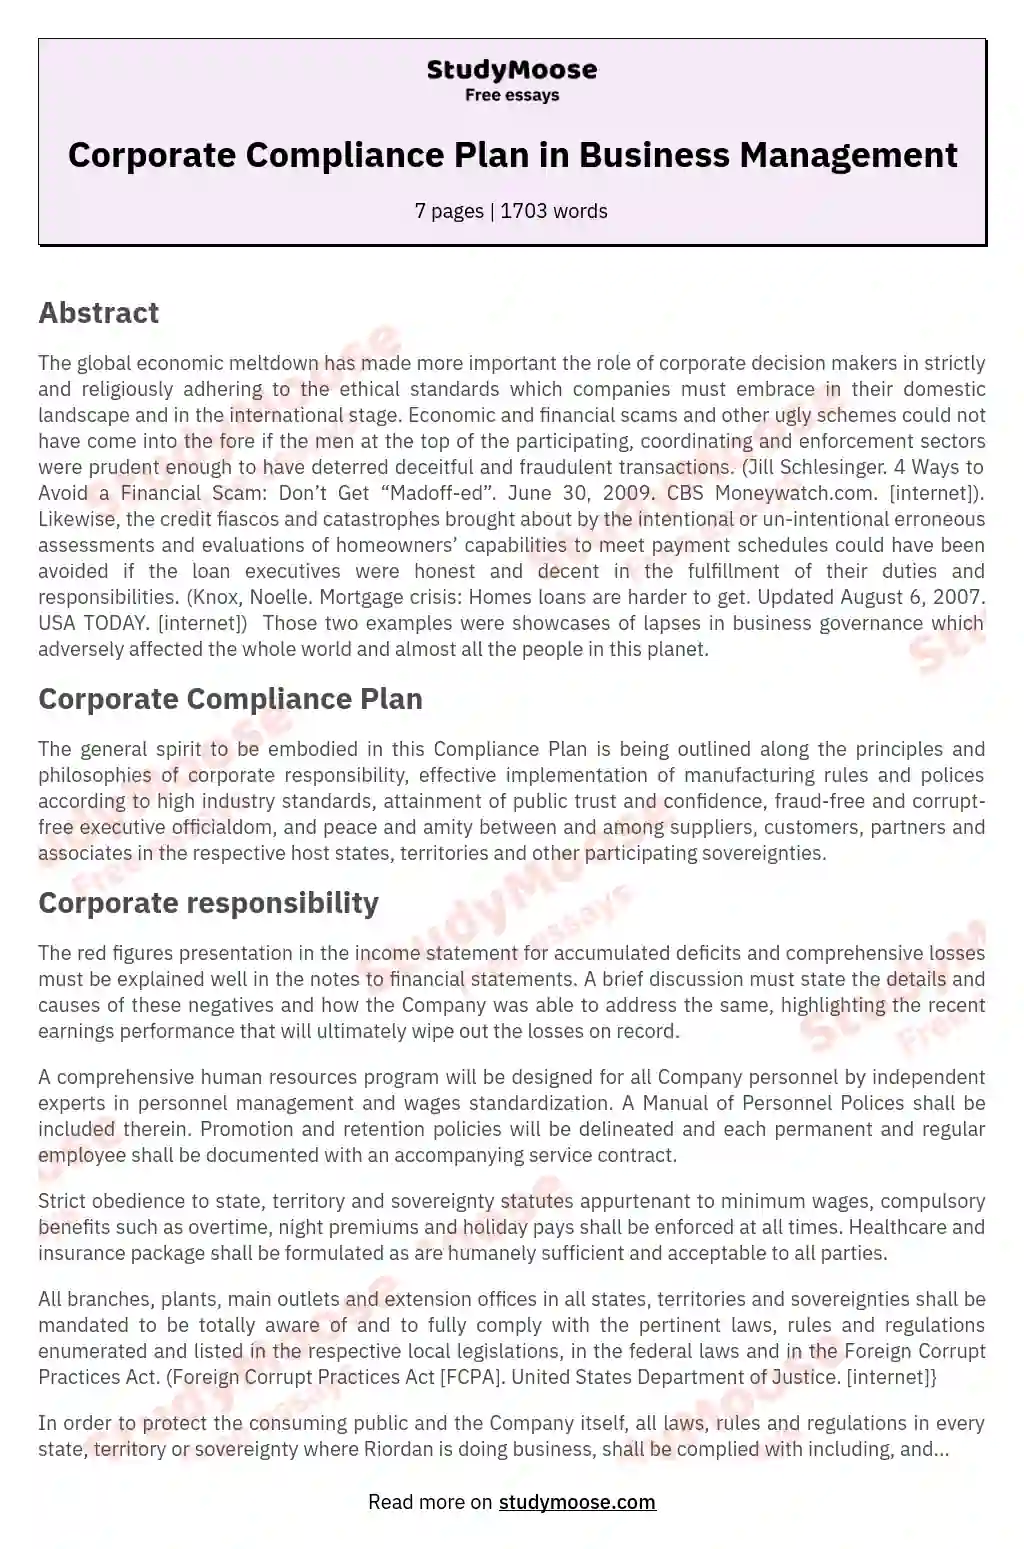 Corporate Compliance Plan in Business Management